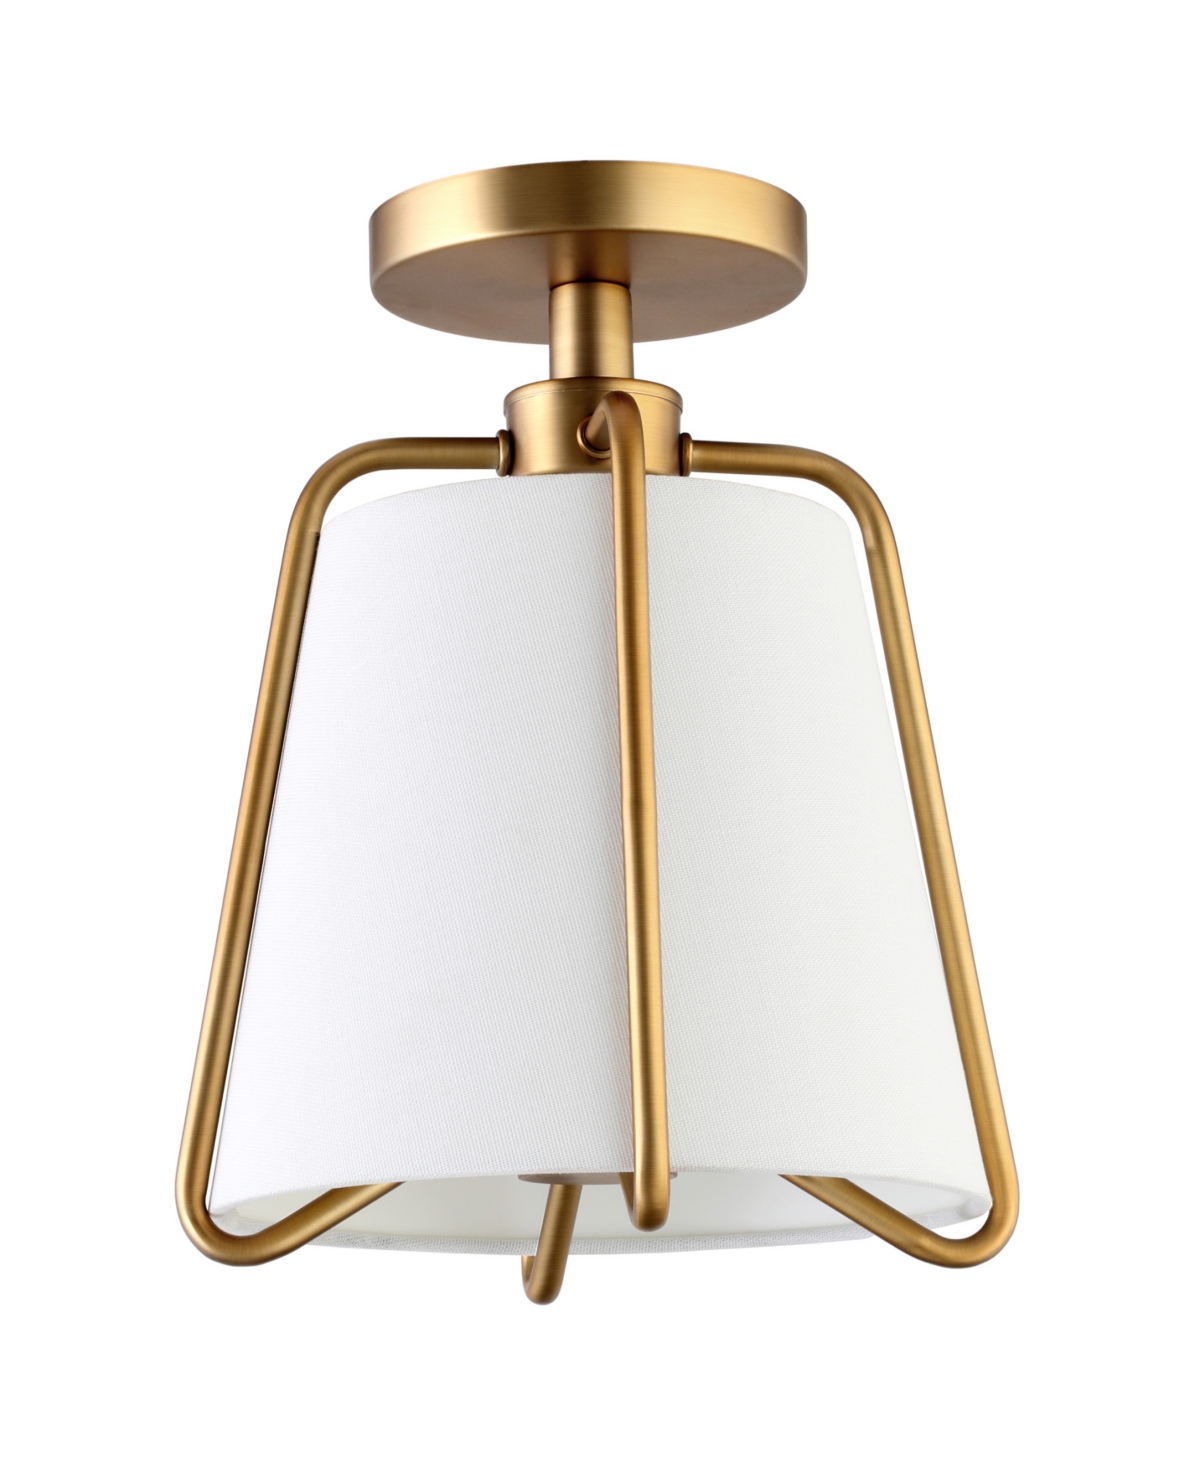 Hudson & Canal Marduk 9.5" Semi Flush Mount With Linen Shade In Brushed Brass